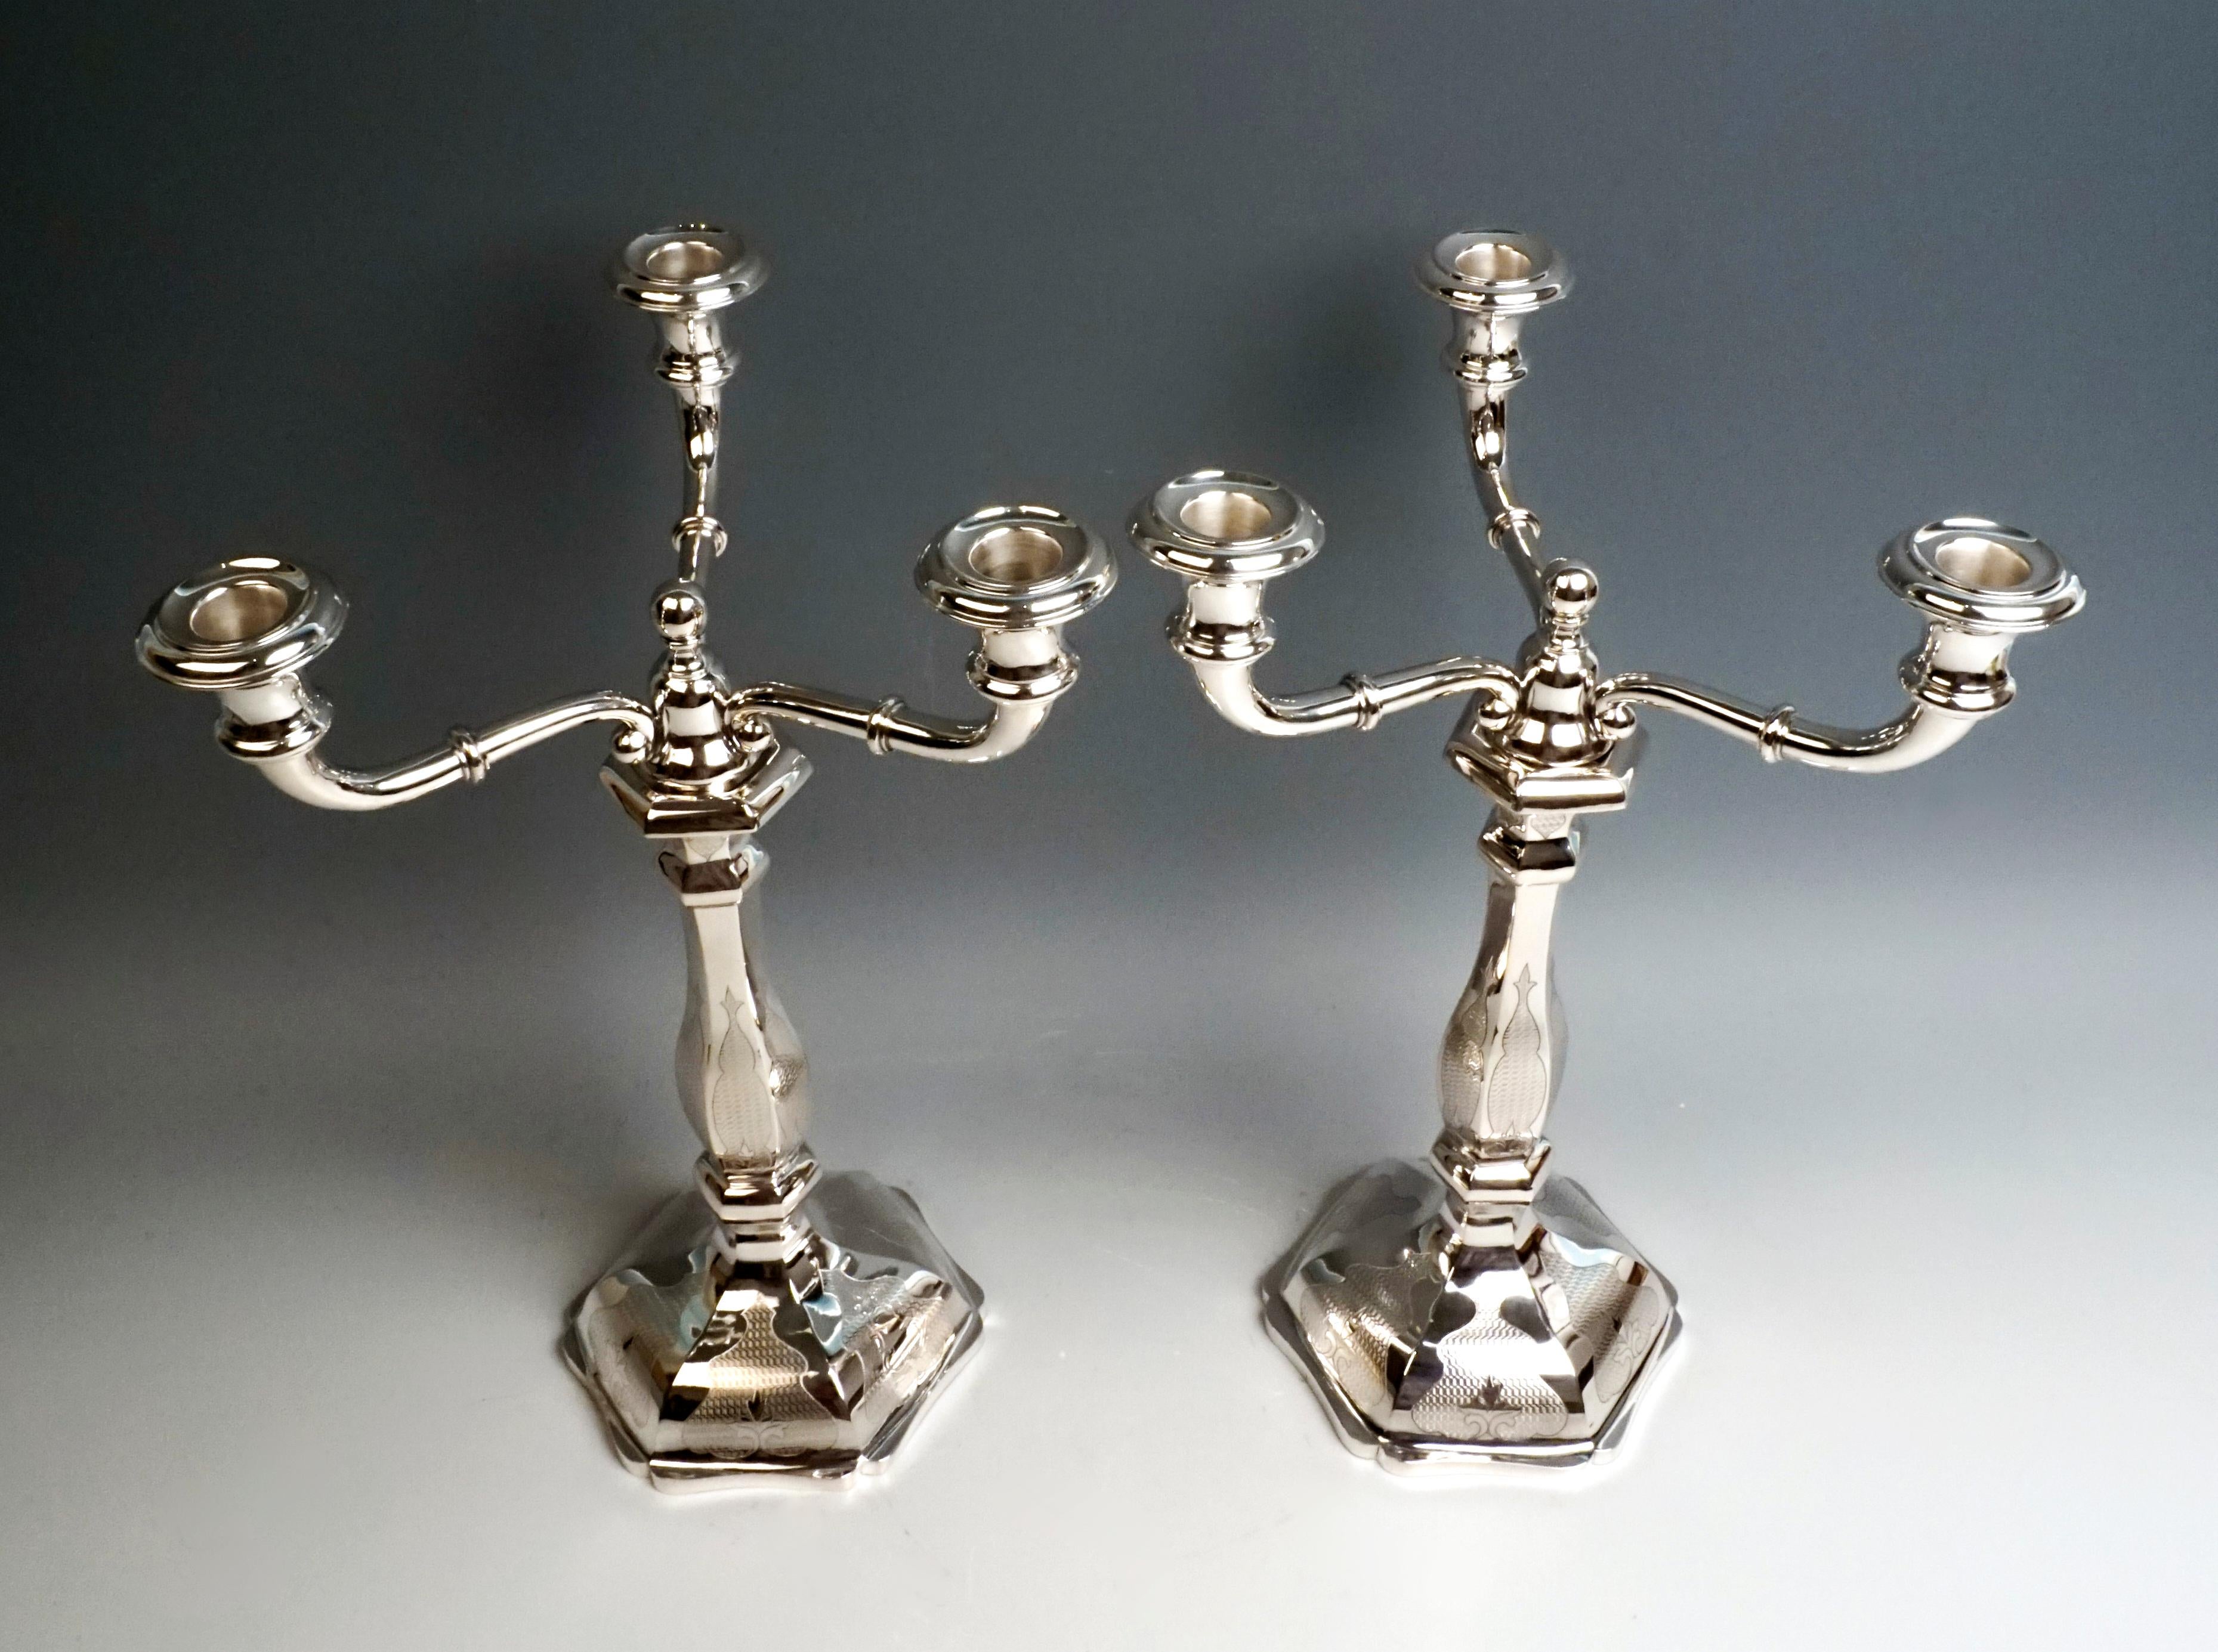 Pair of three-flame silver candelabra on a hexagonal, cambered, unfilled base. Shank with hexagonal cross-section, smooth surface with gouilloché leaf decoration. On the top piece there are three volute-shaped curved arms that widen upwards and open